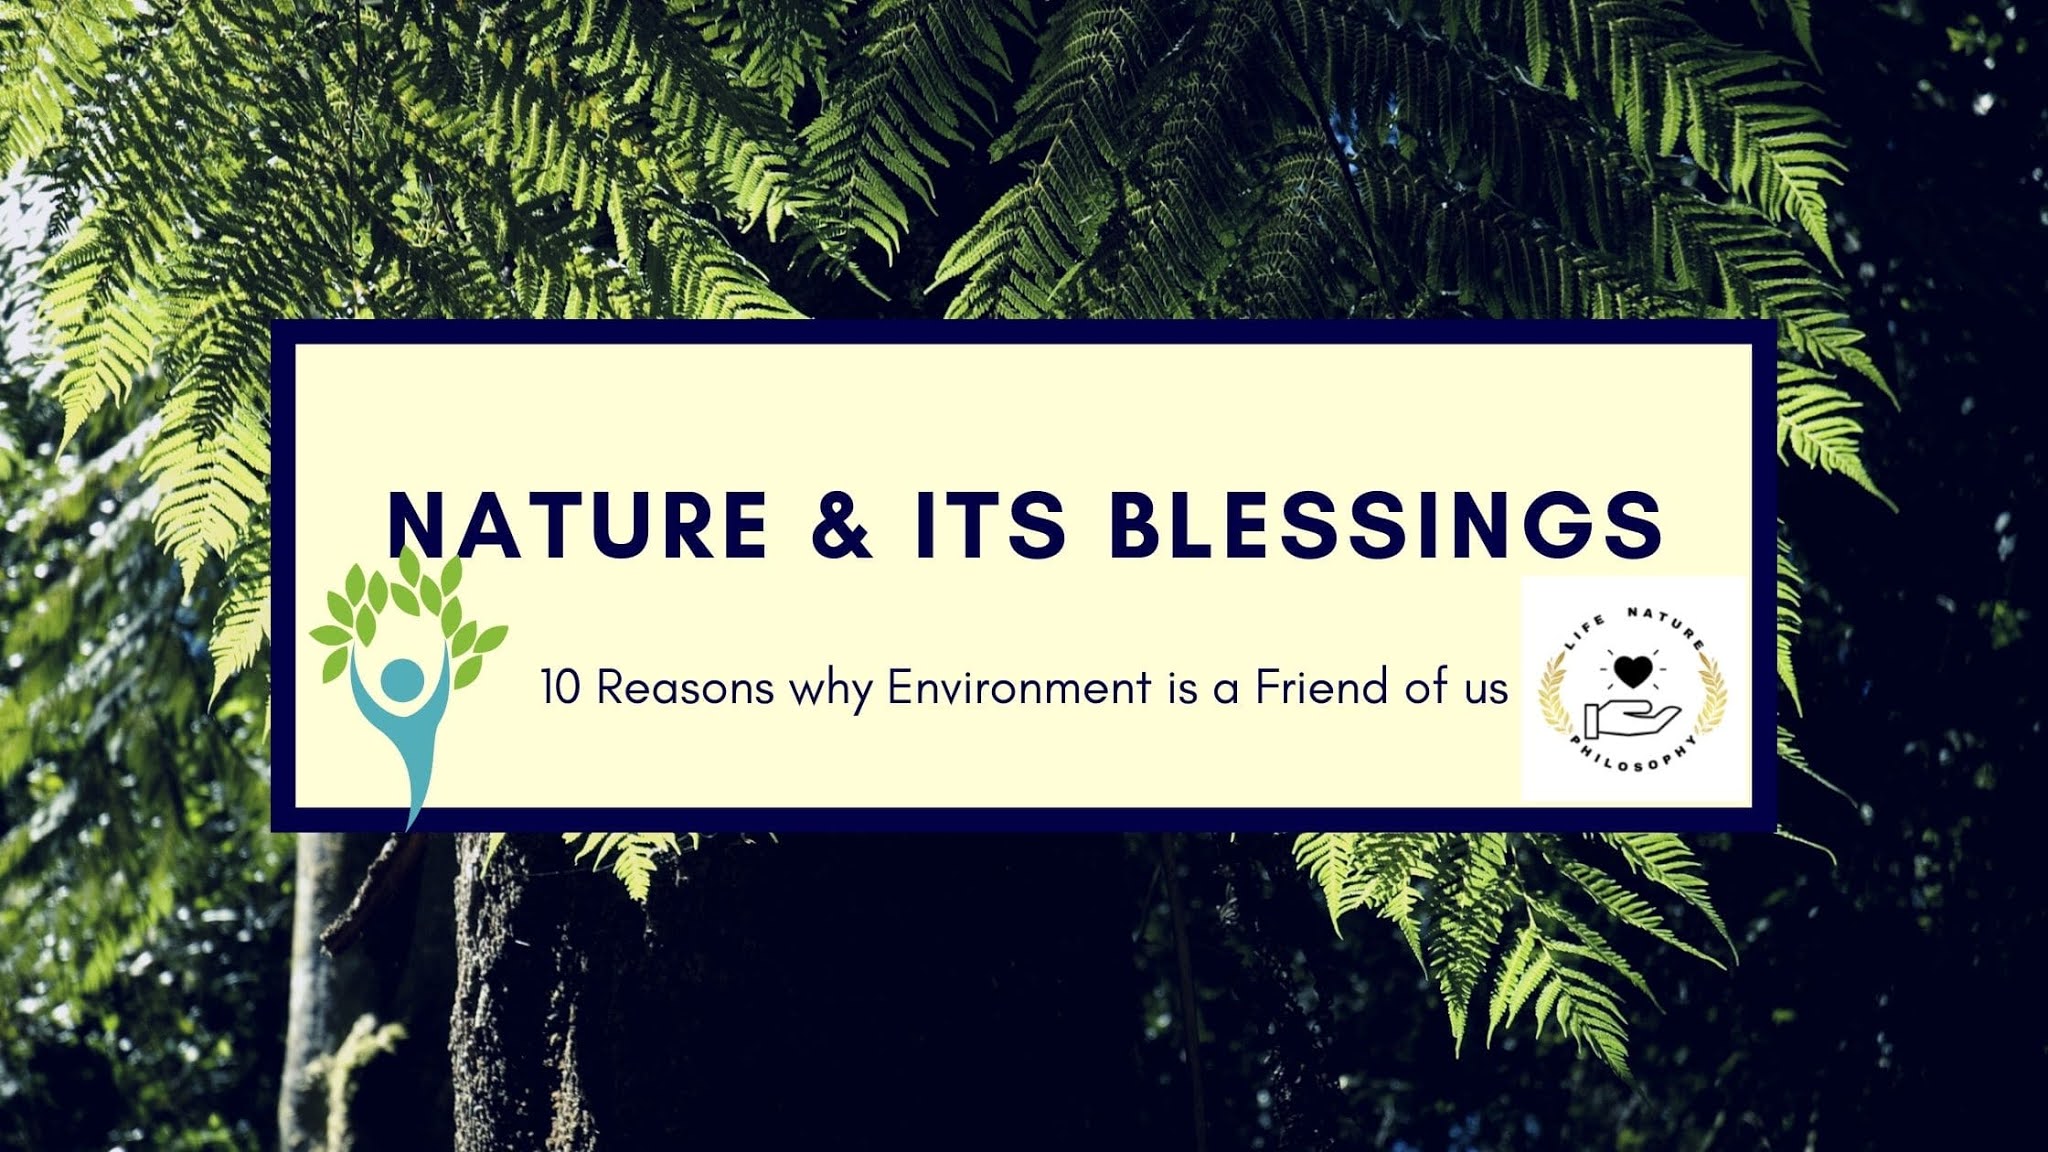 Nature and Its Blessings - 10 reasons why environment is a friend to us